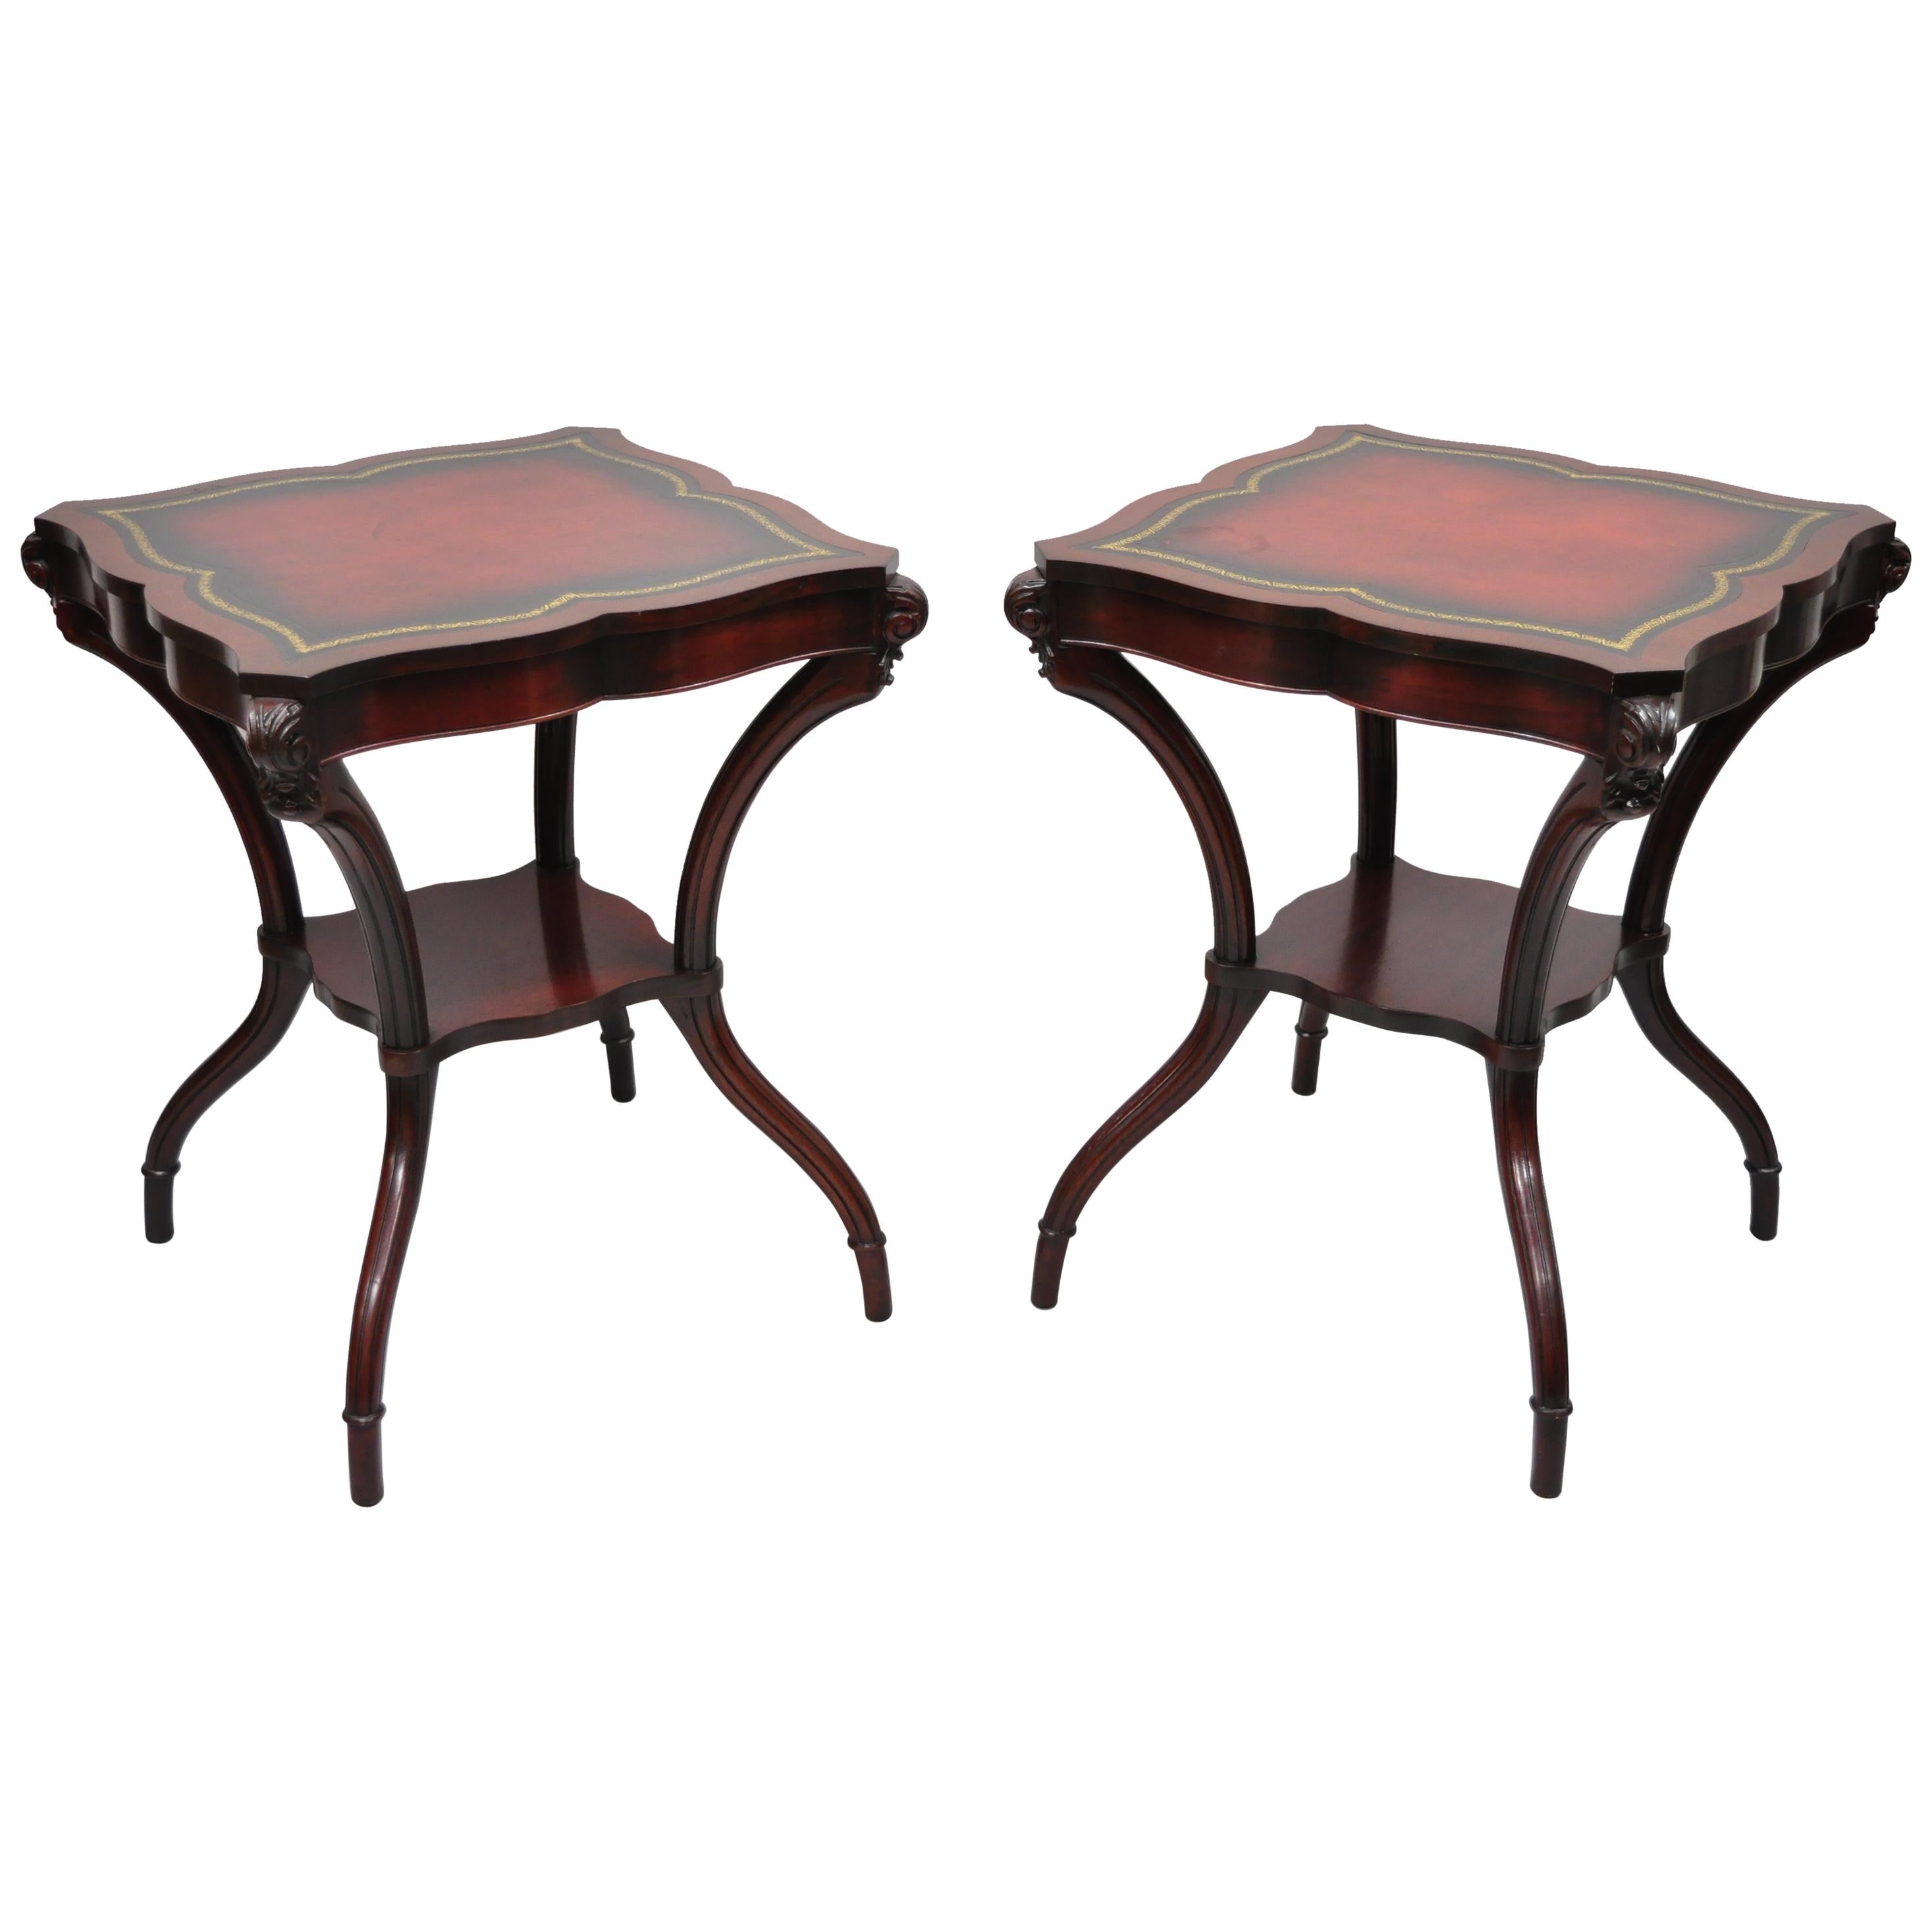 Vintage French Regency Style Red Leather Top Mahogany Lamp End Tables, a Pair For Sale